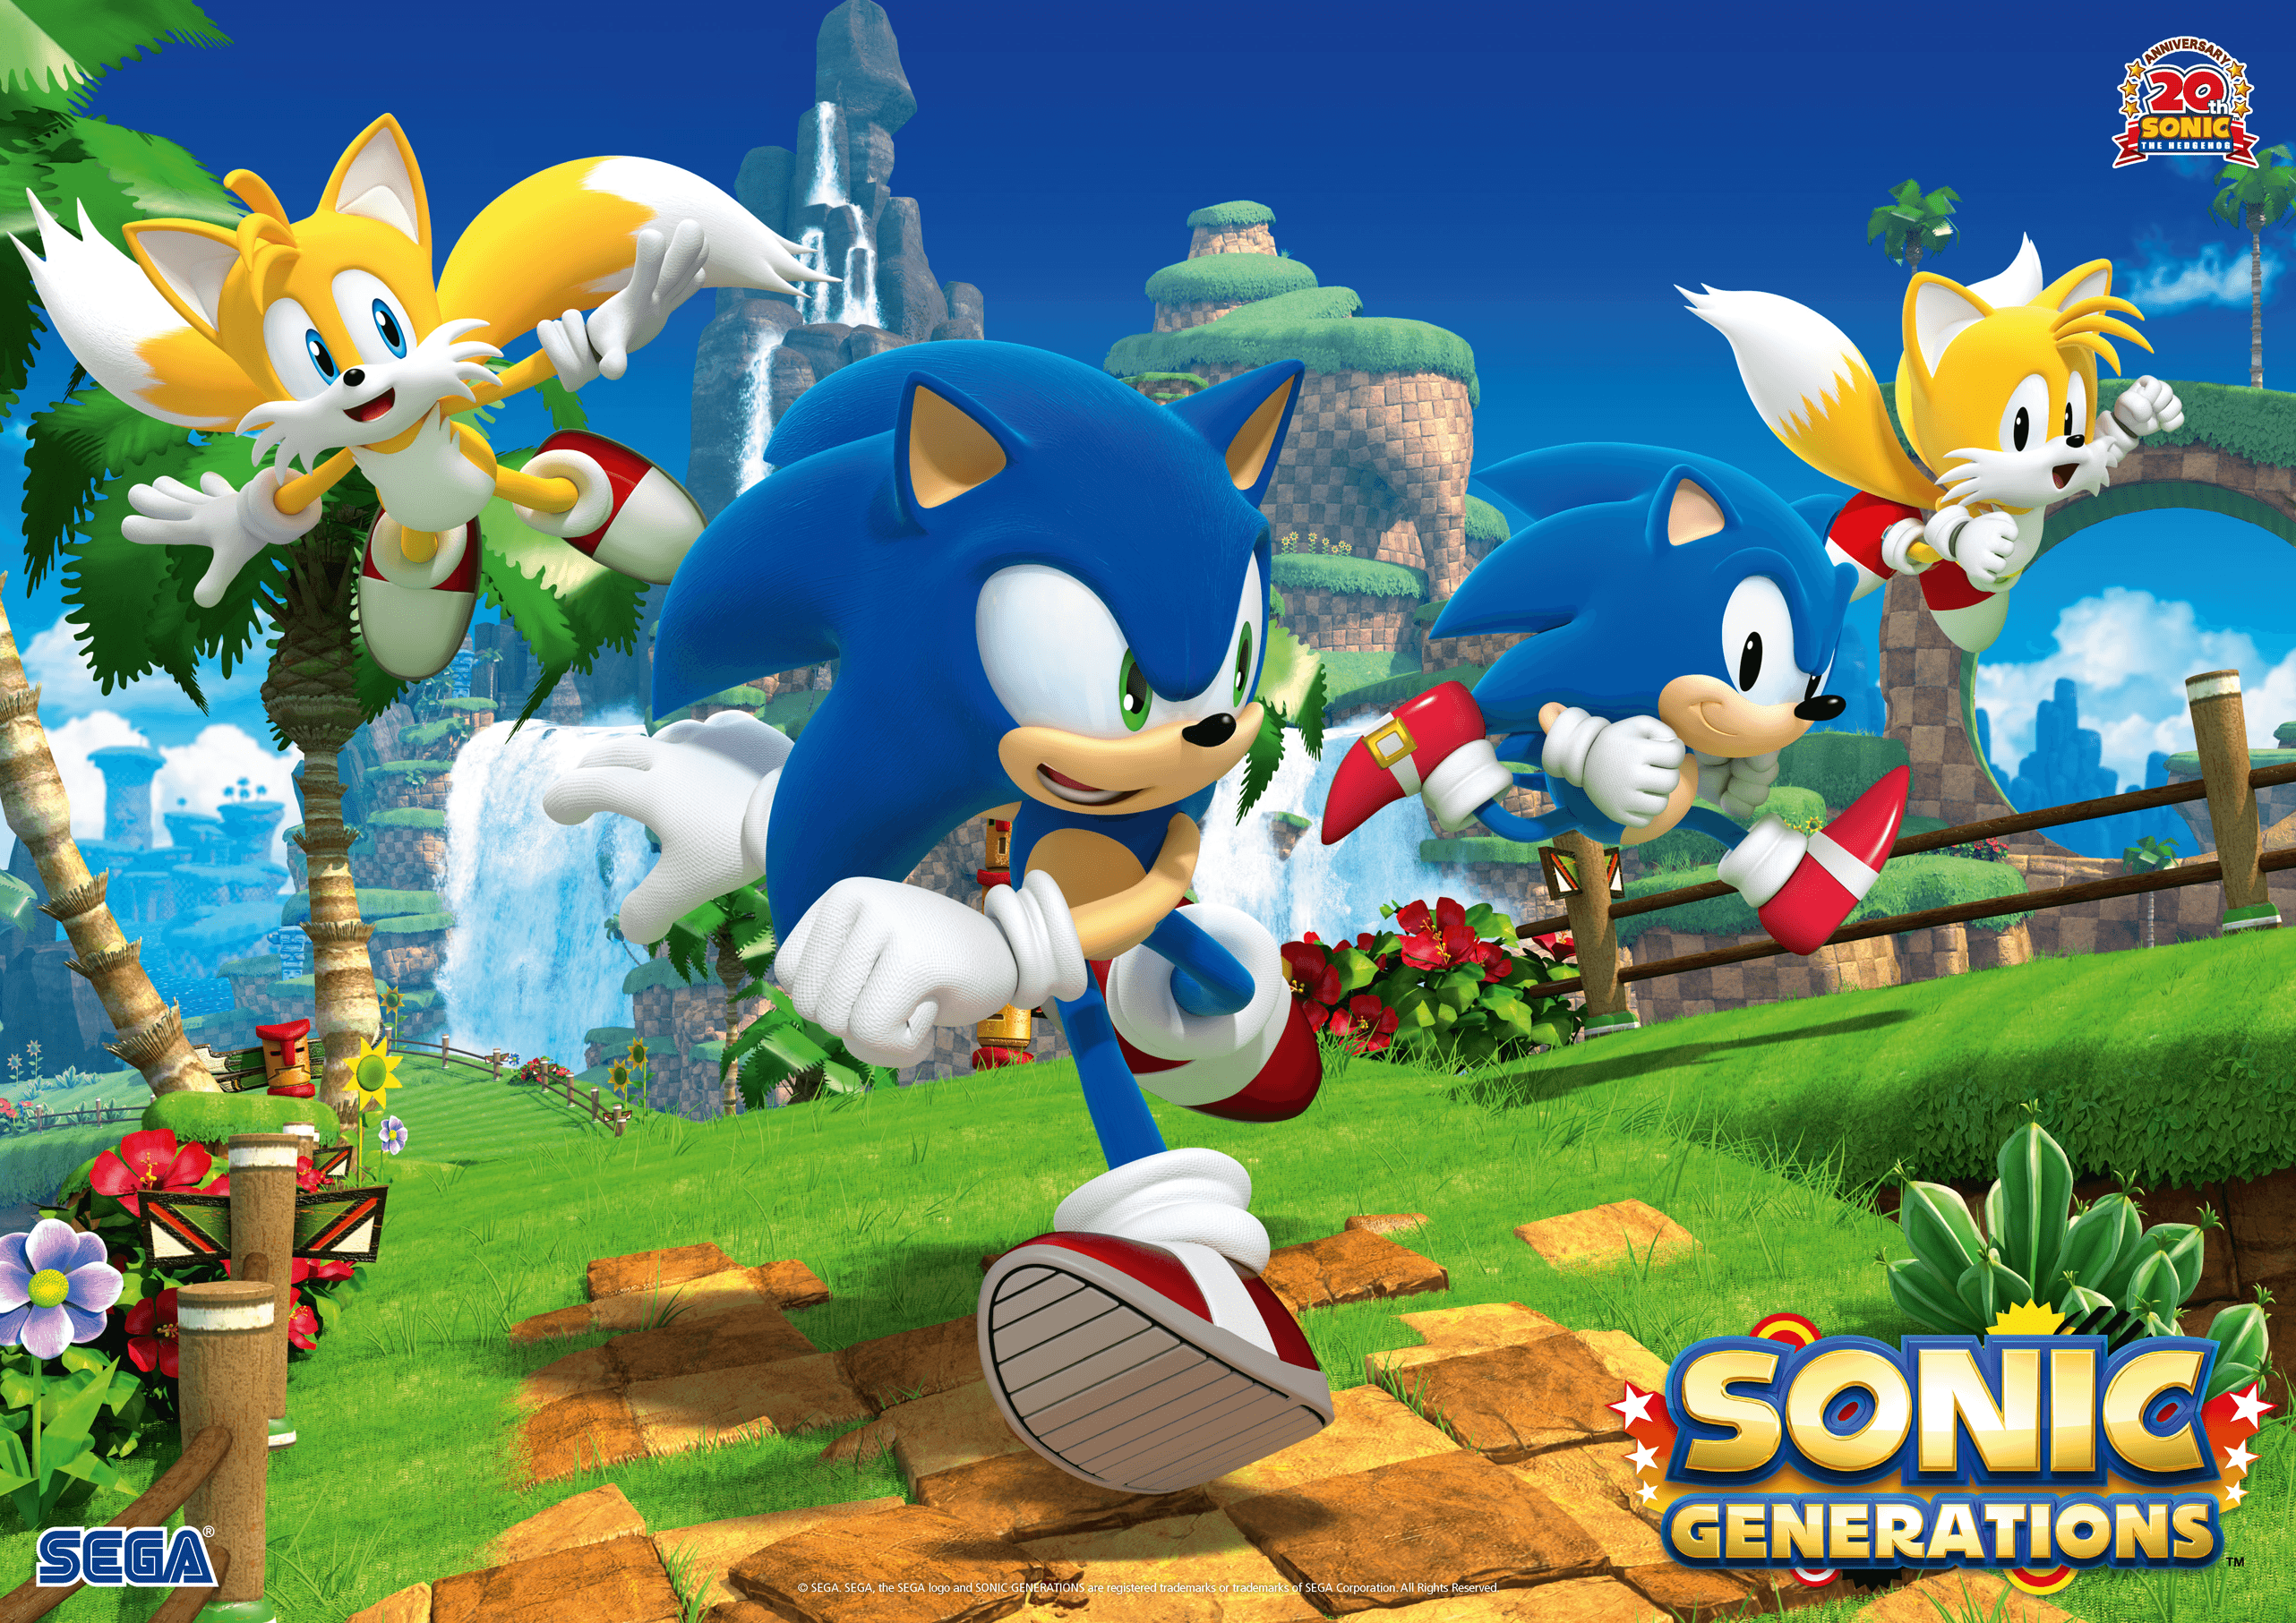 Sonic Dxe Wallpapers